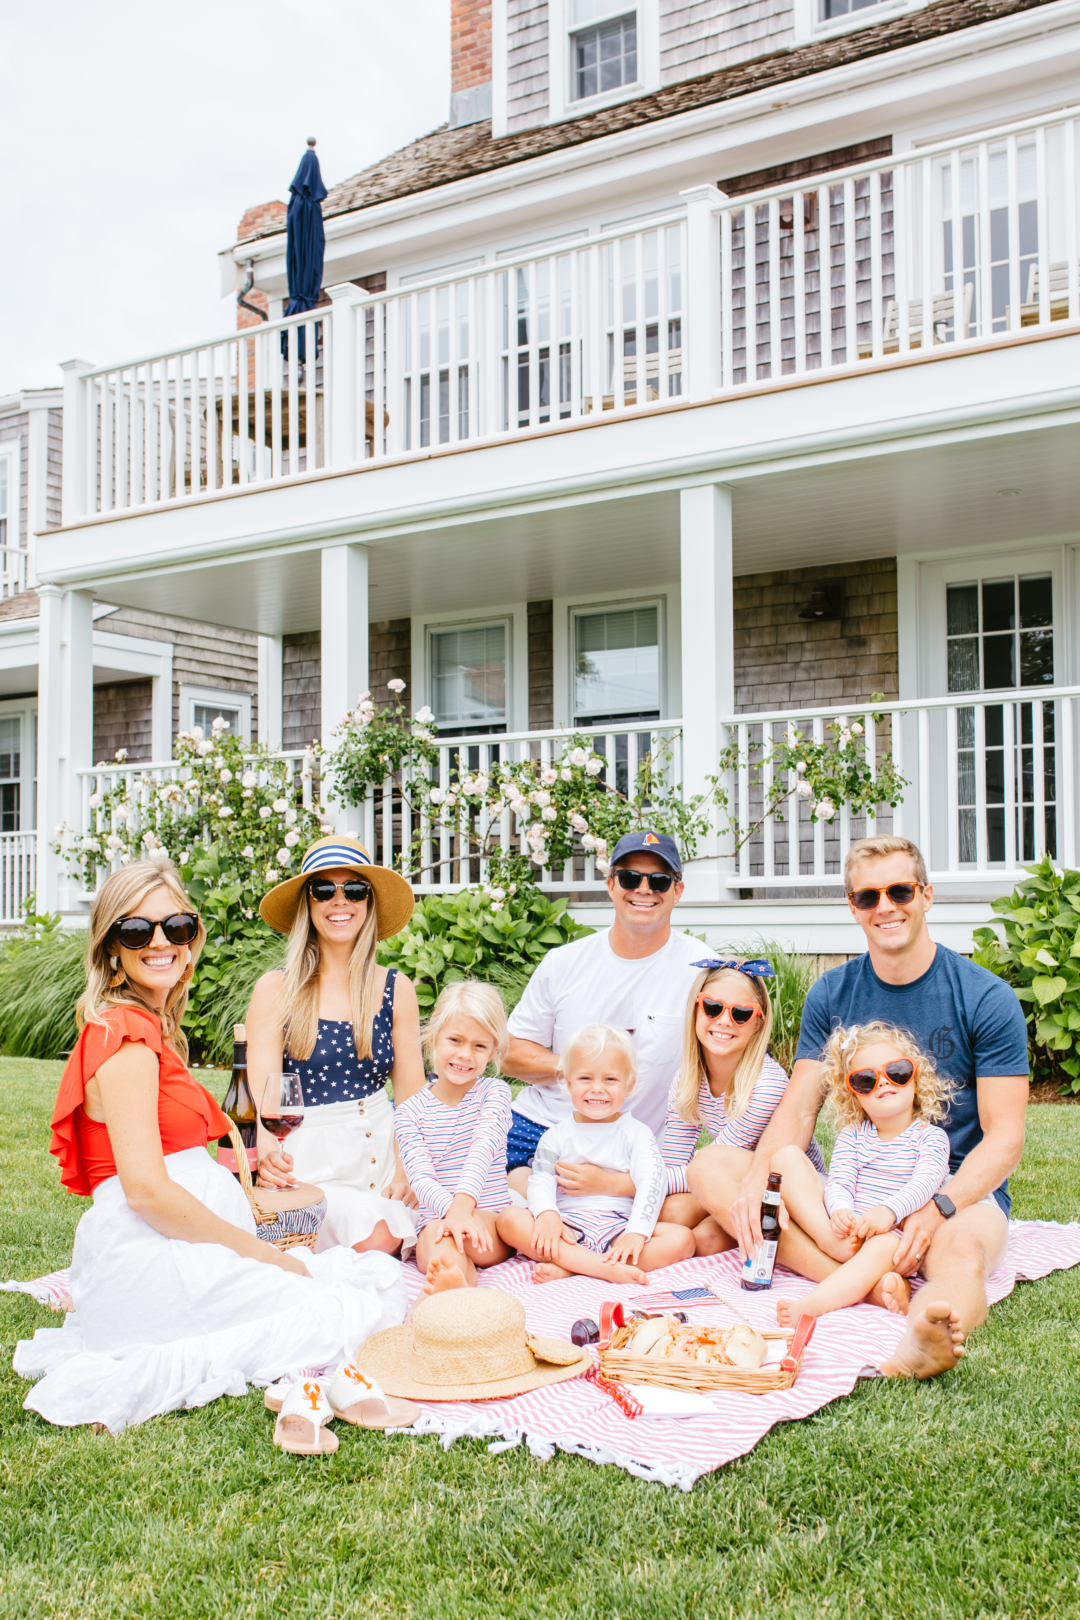 Travel: Harborview Nantucket Picnic with Palm Beach Lately